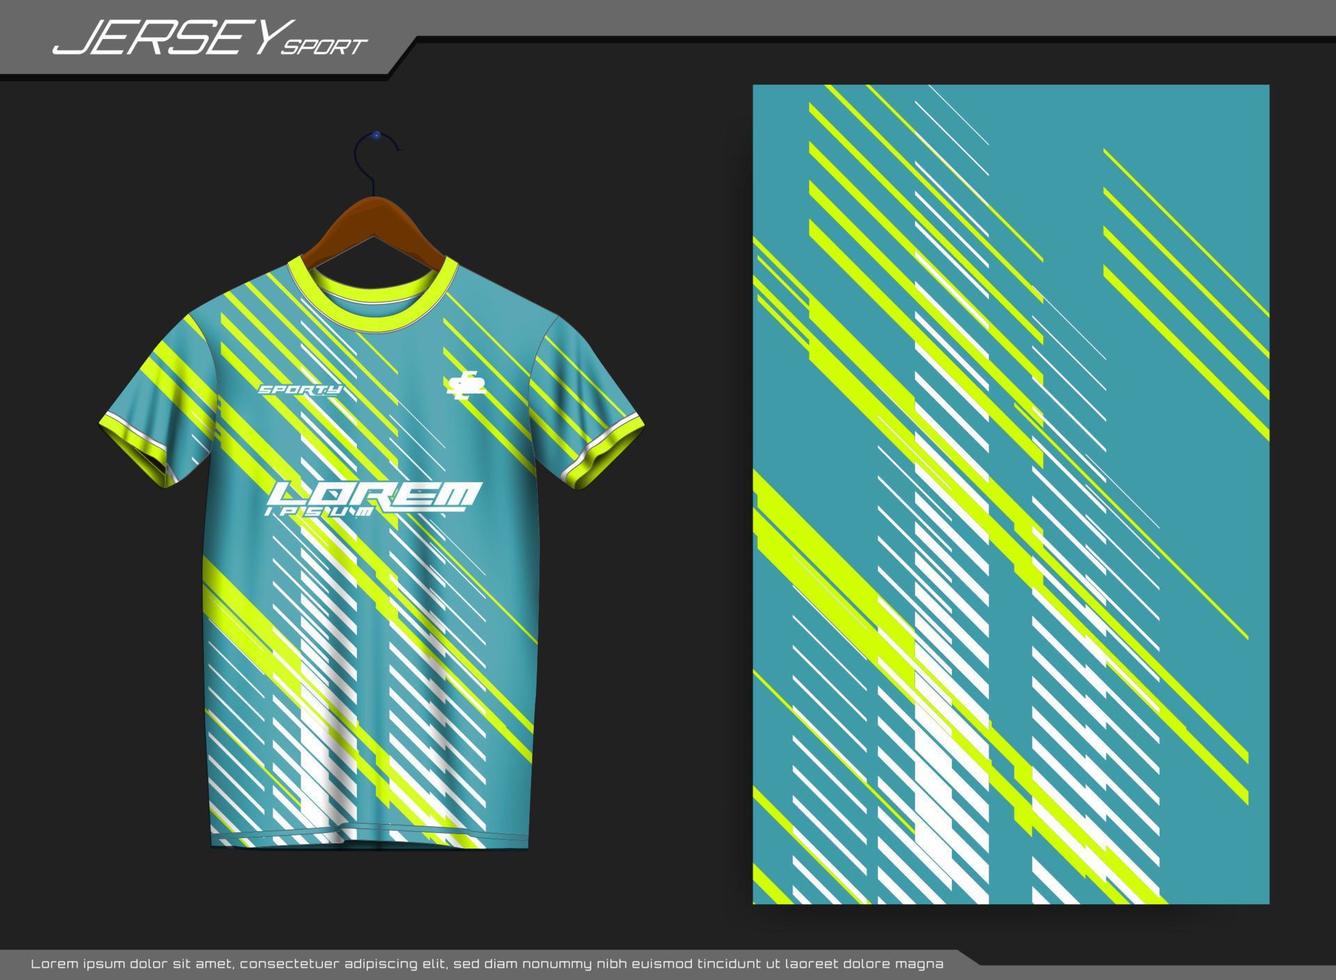 Jersey sports t-shirt. Soccer jersey for soccer club. Suitable for jersey, background, poster, etc. vector